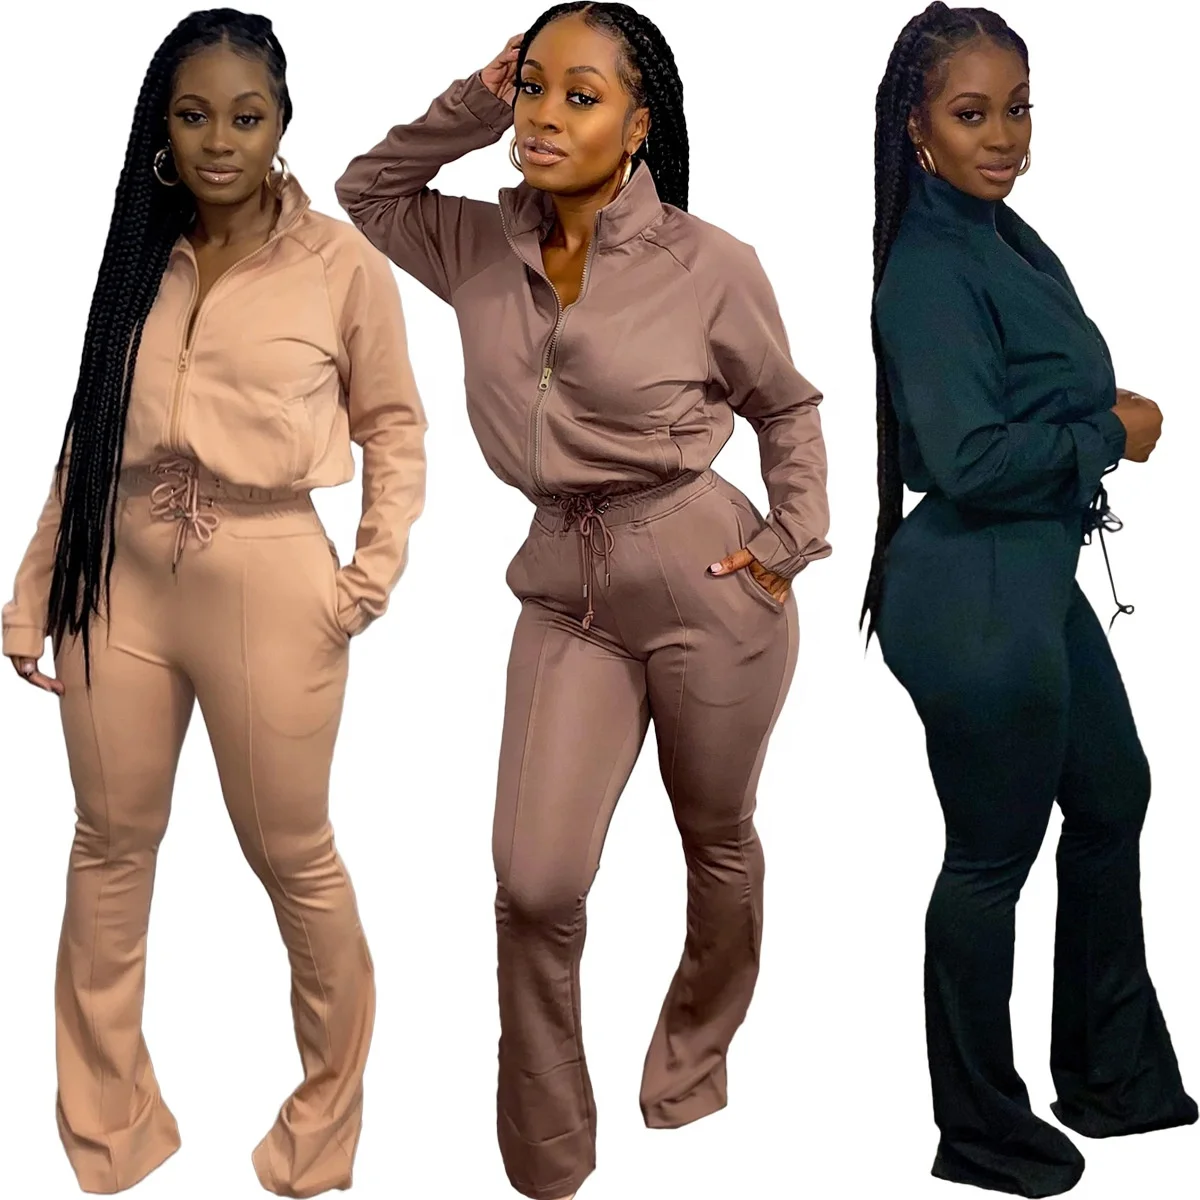 

B63489A New product cross-border fashion women's pure color sports casual pants two-piece set, Coffee/apricot/dark green